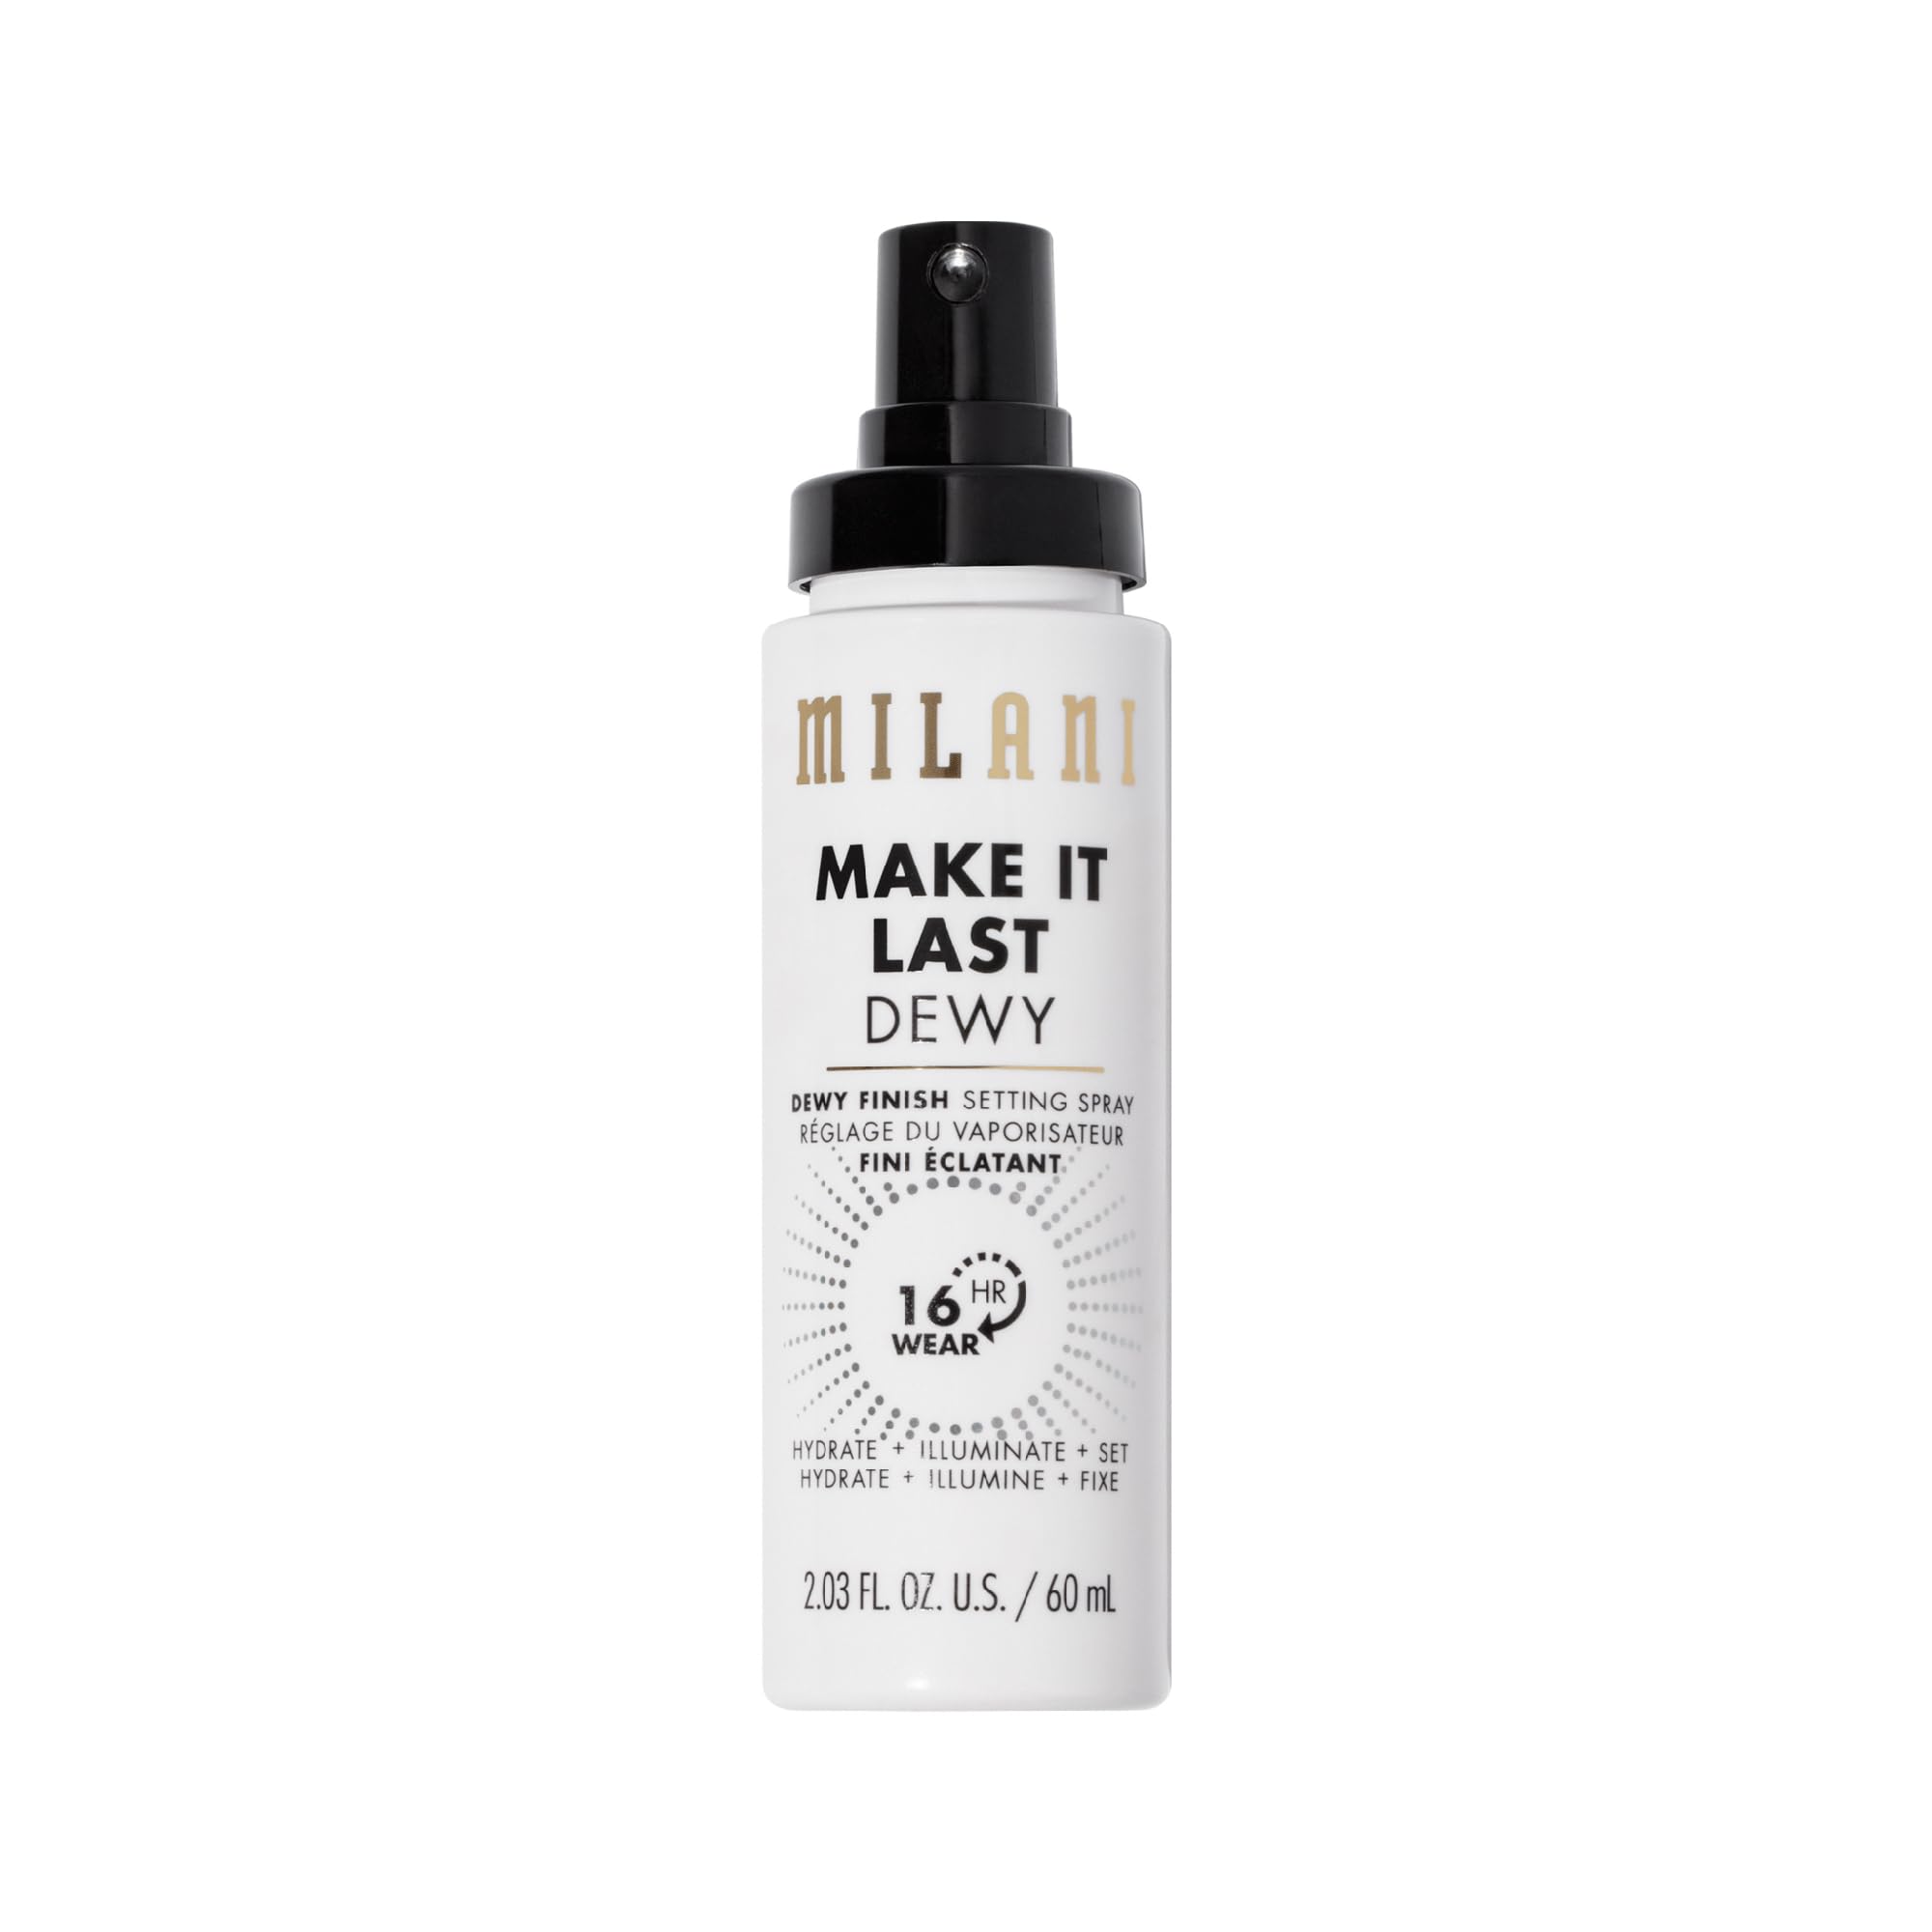 Milani Make It Dewy 3-In-1 Setting Spray - Hydrate + Illuminate + Set (2.03 Fl. Oz.) Cruelty-Free Makeup Setting Spray - Prime & Hydrate Skin for a Bright, Refreshing Look